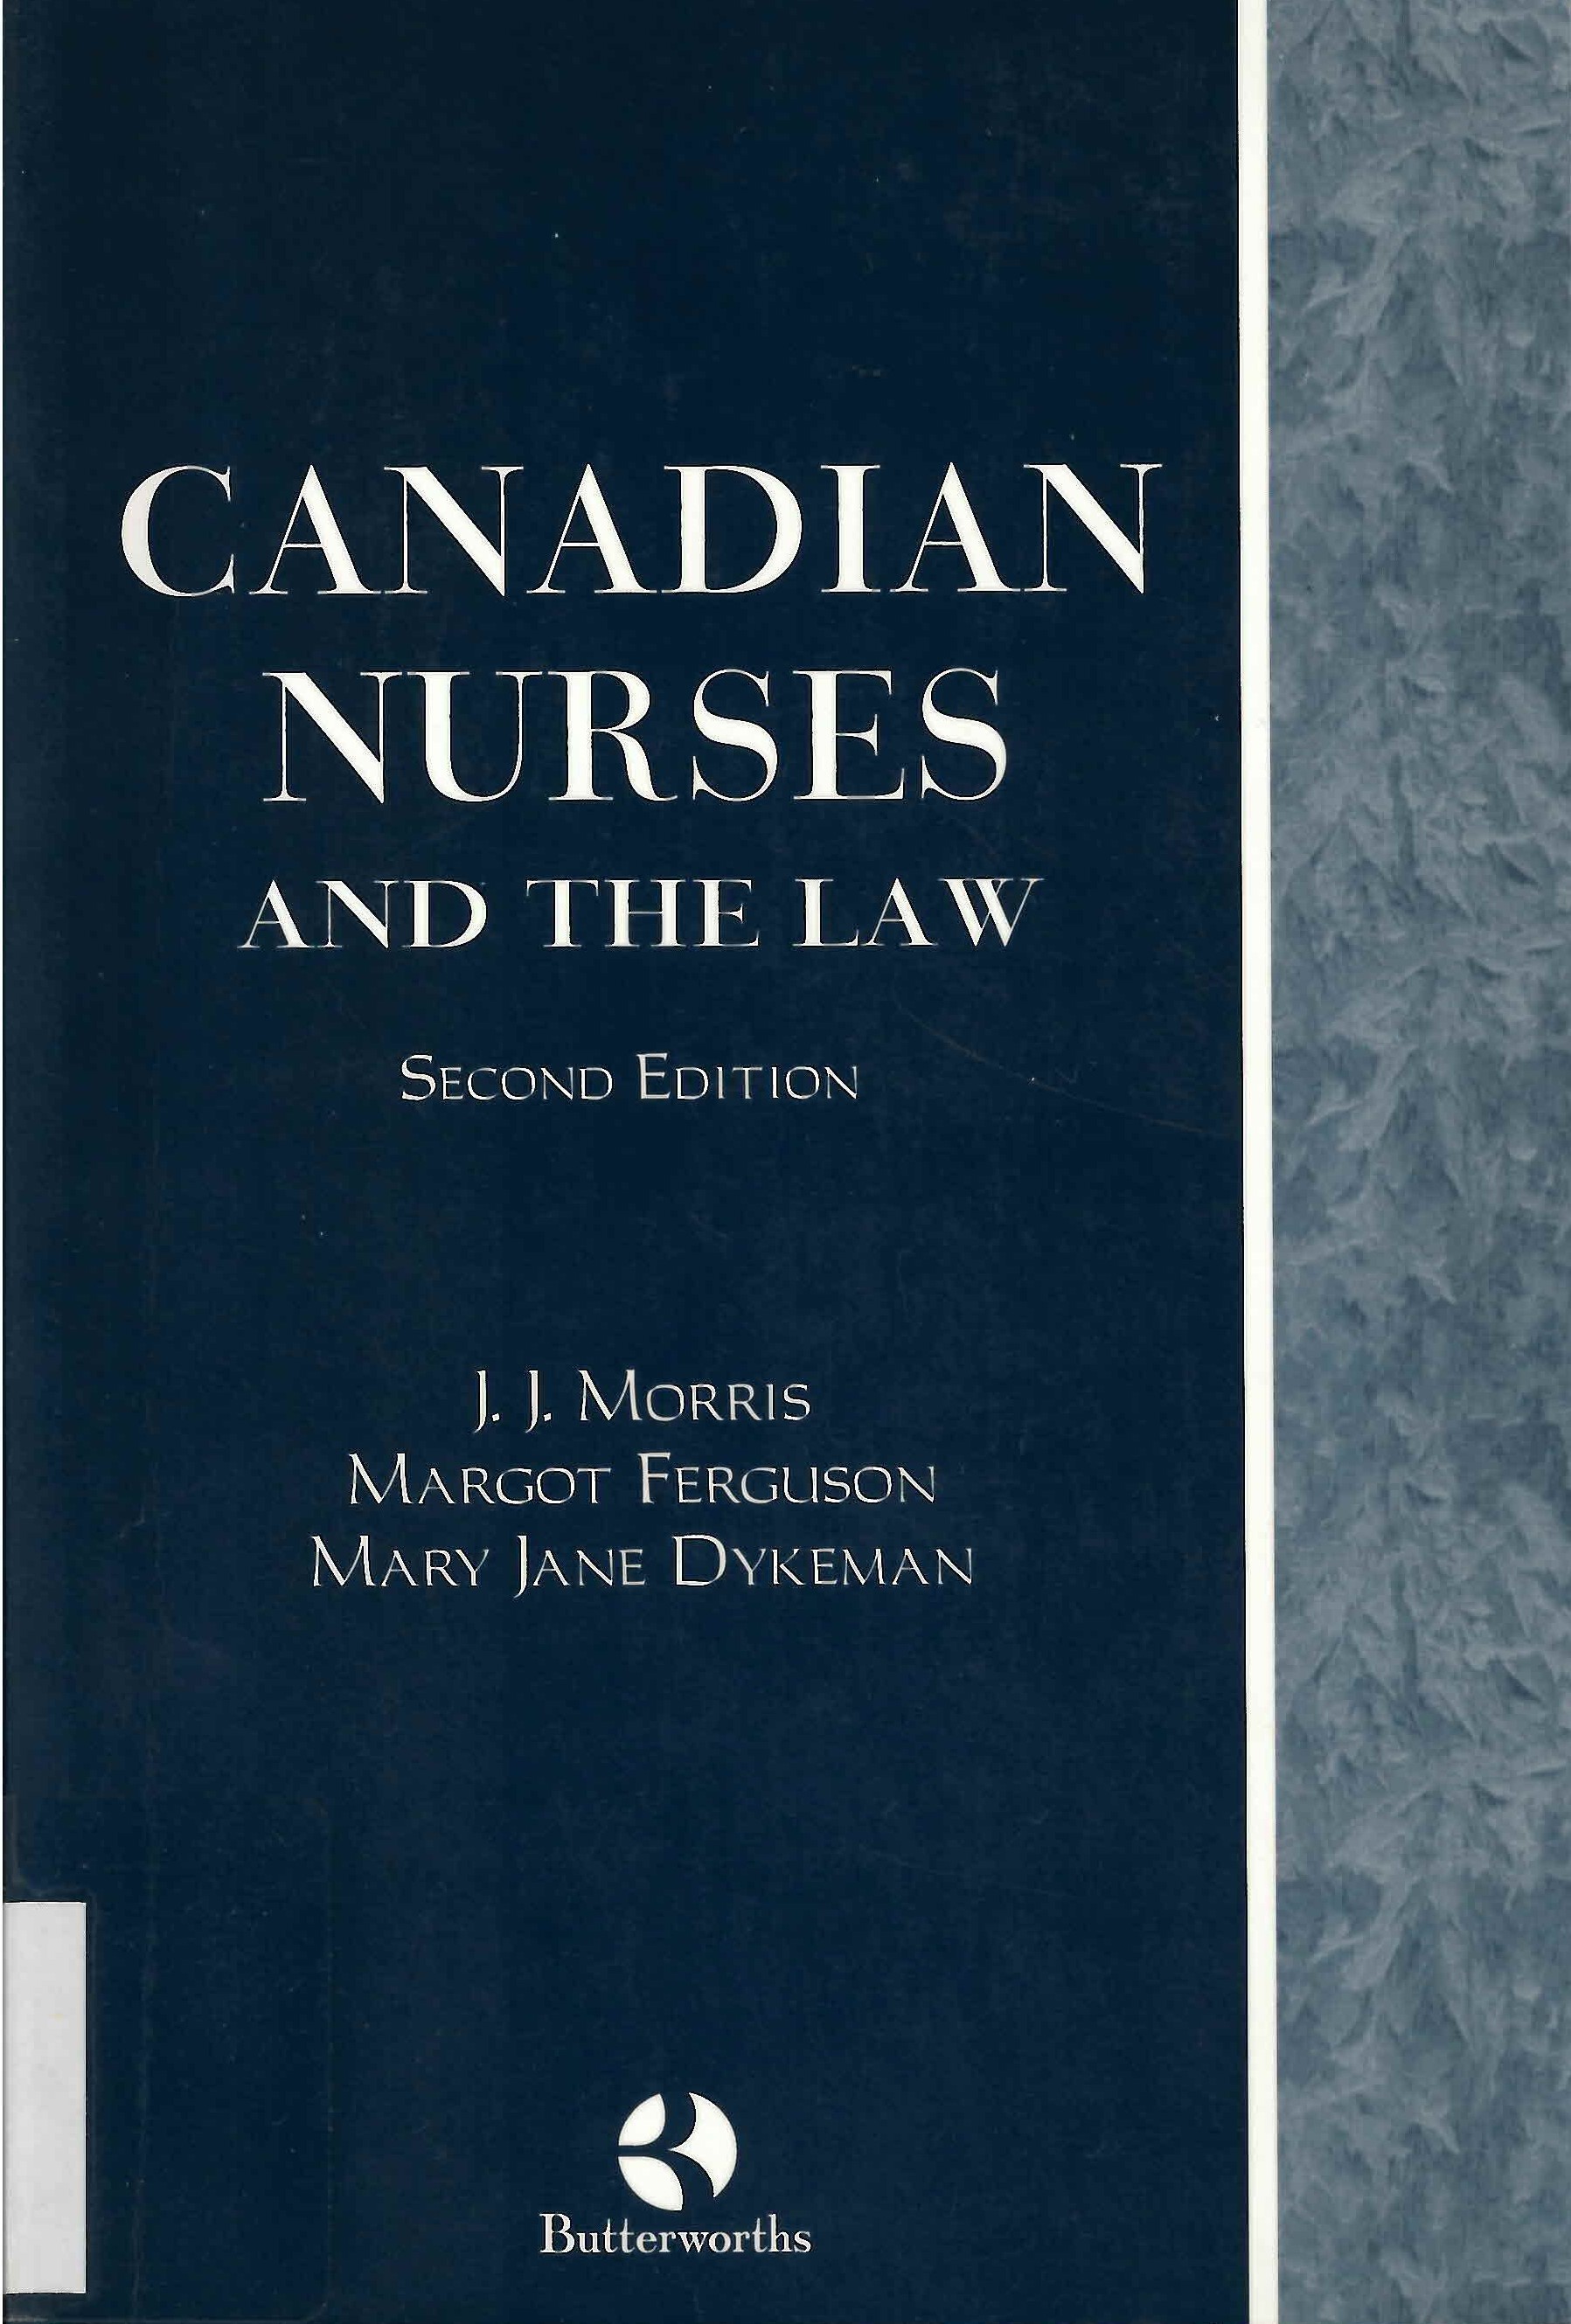 Canadian nurses and the law